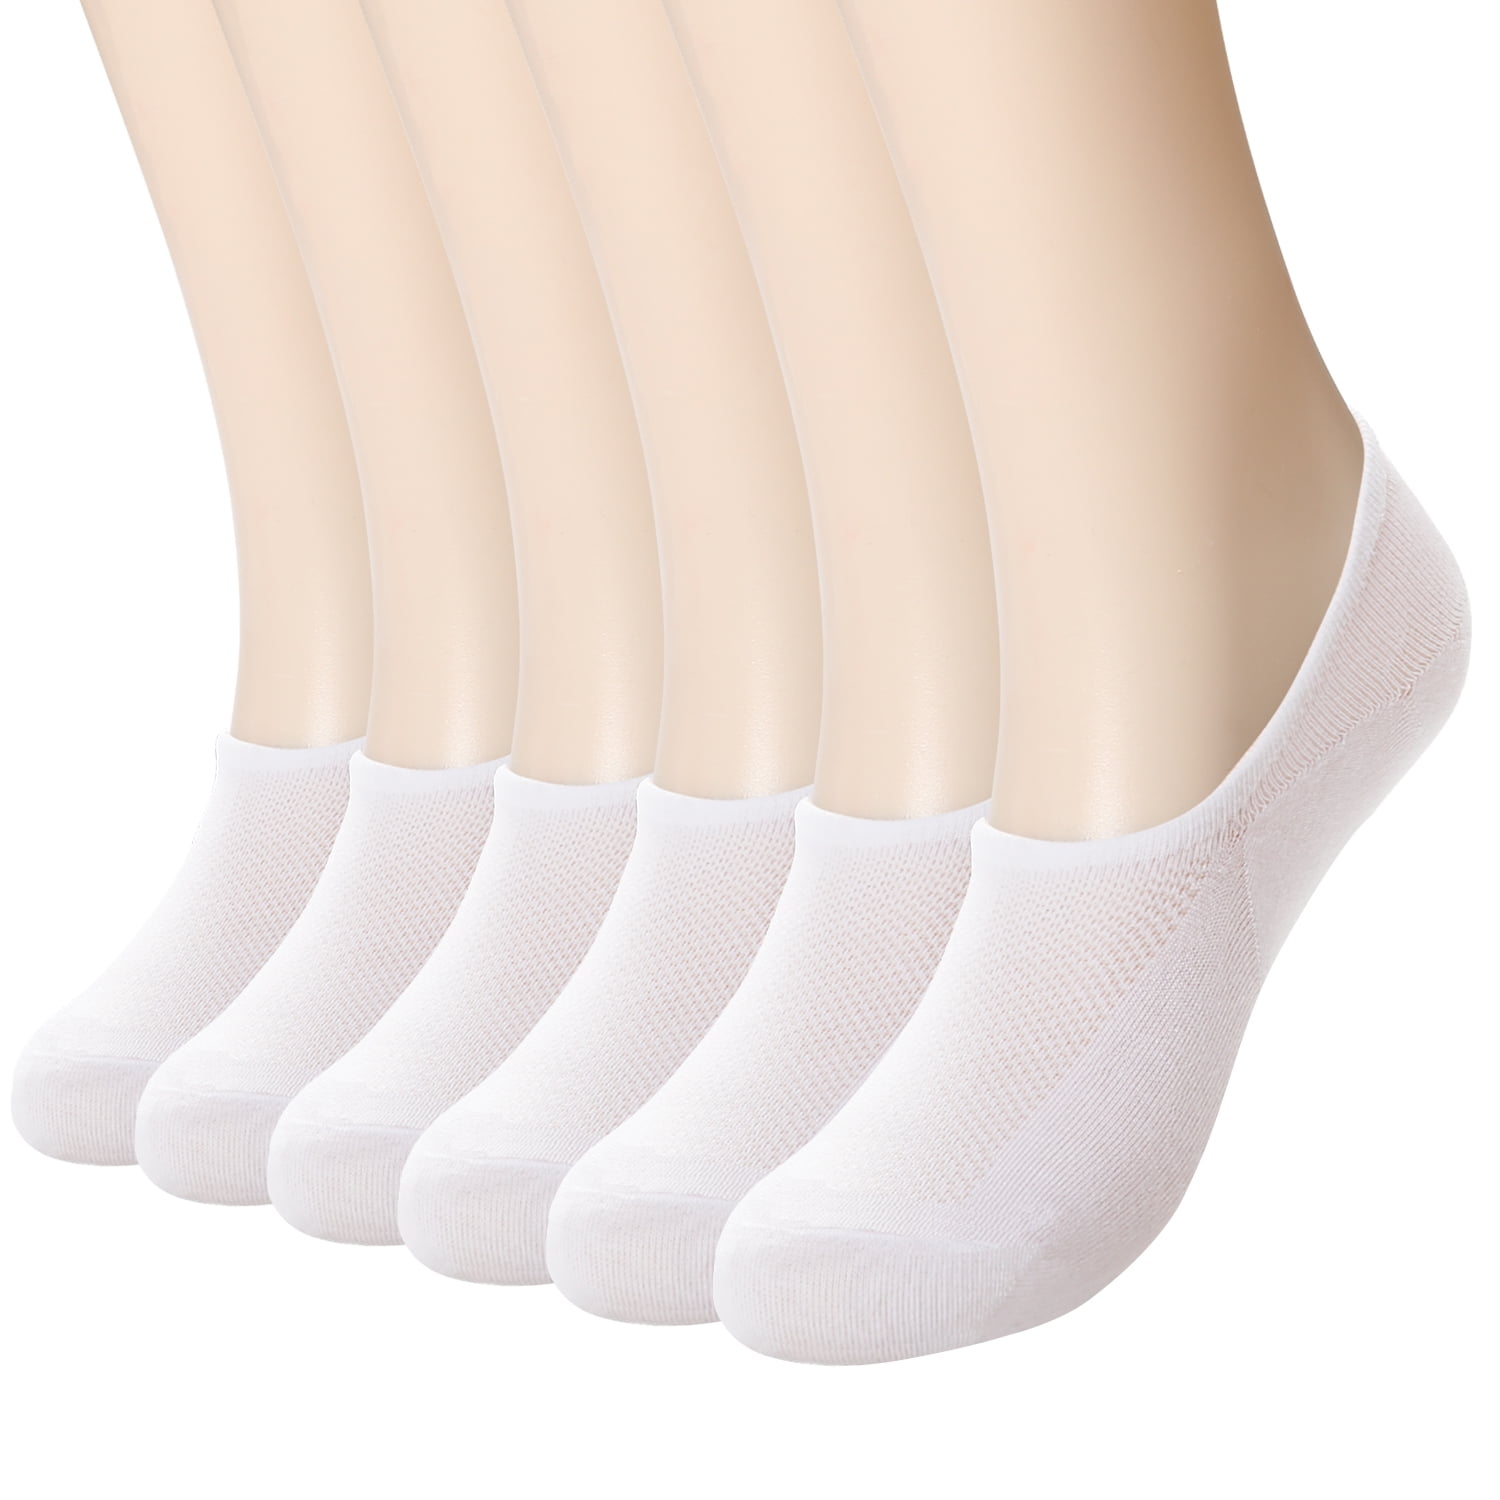 MD 6 Pack Womens No Show Liner Socks 